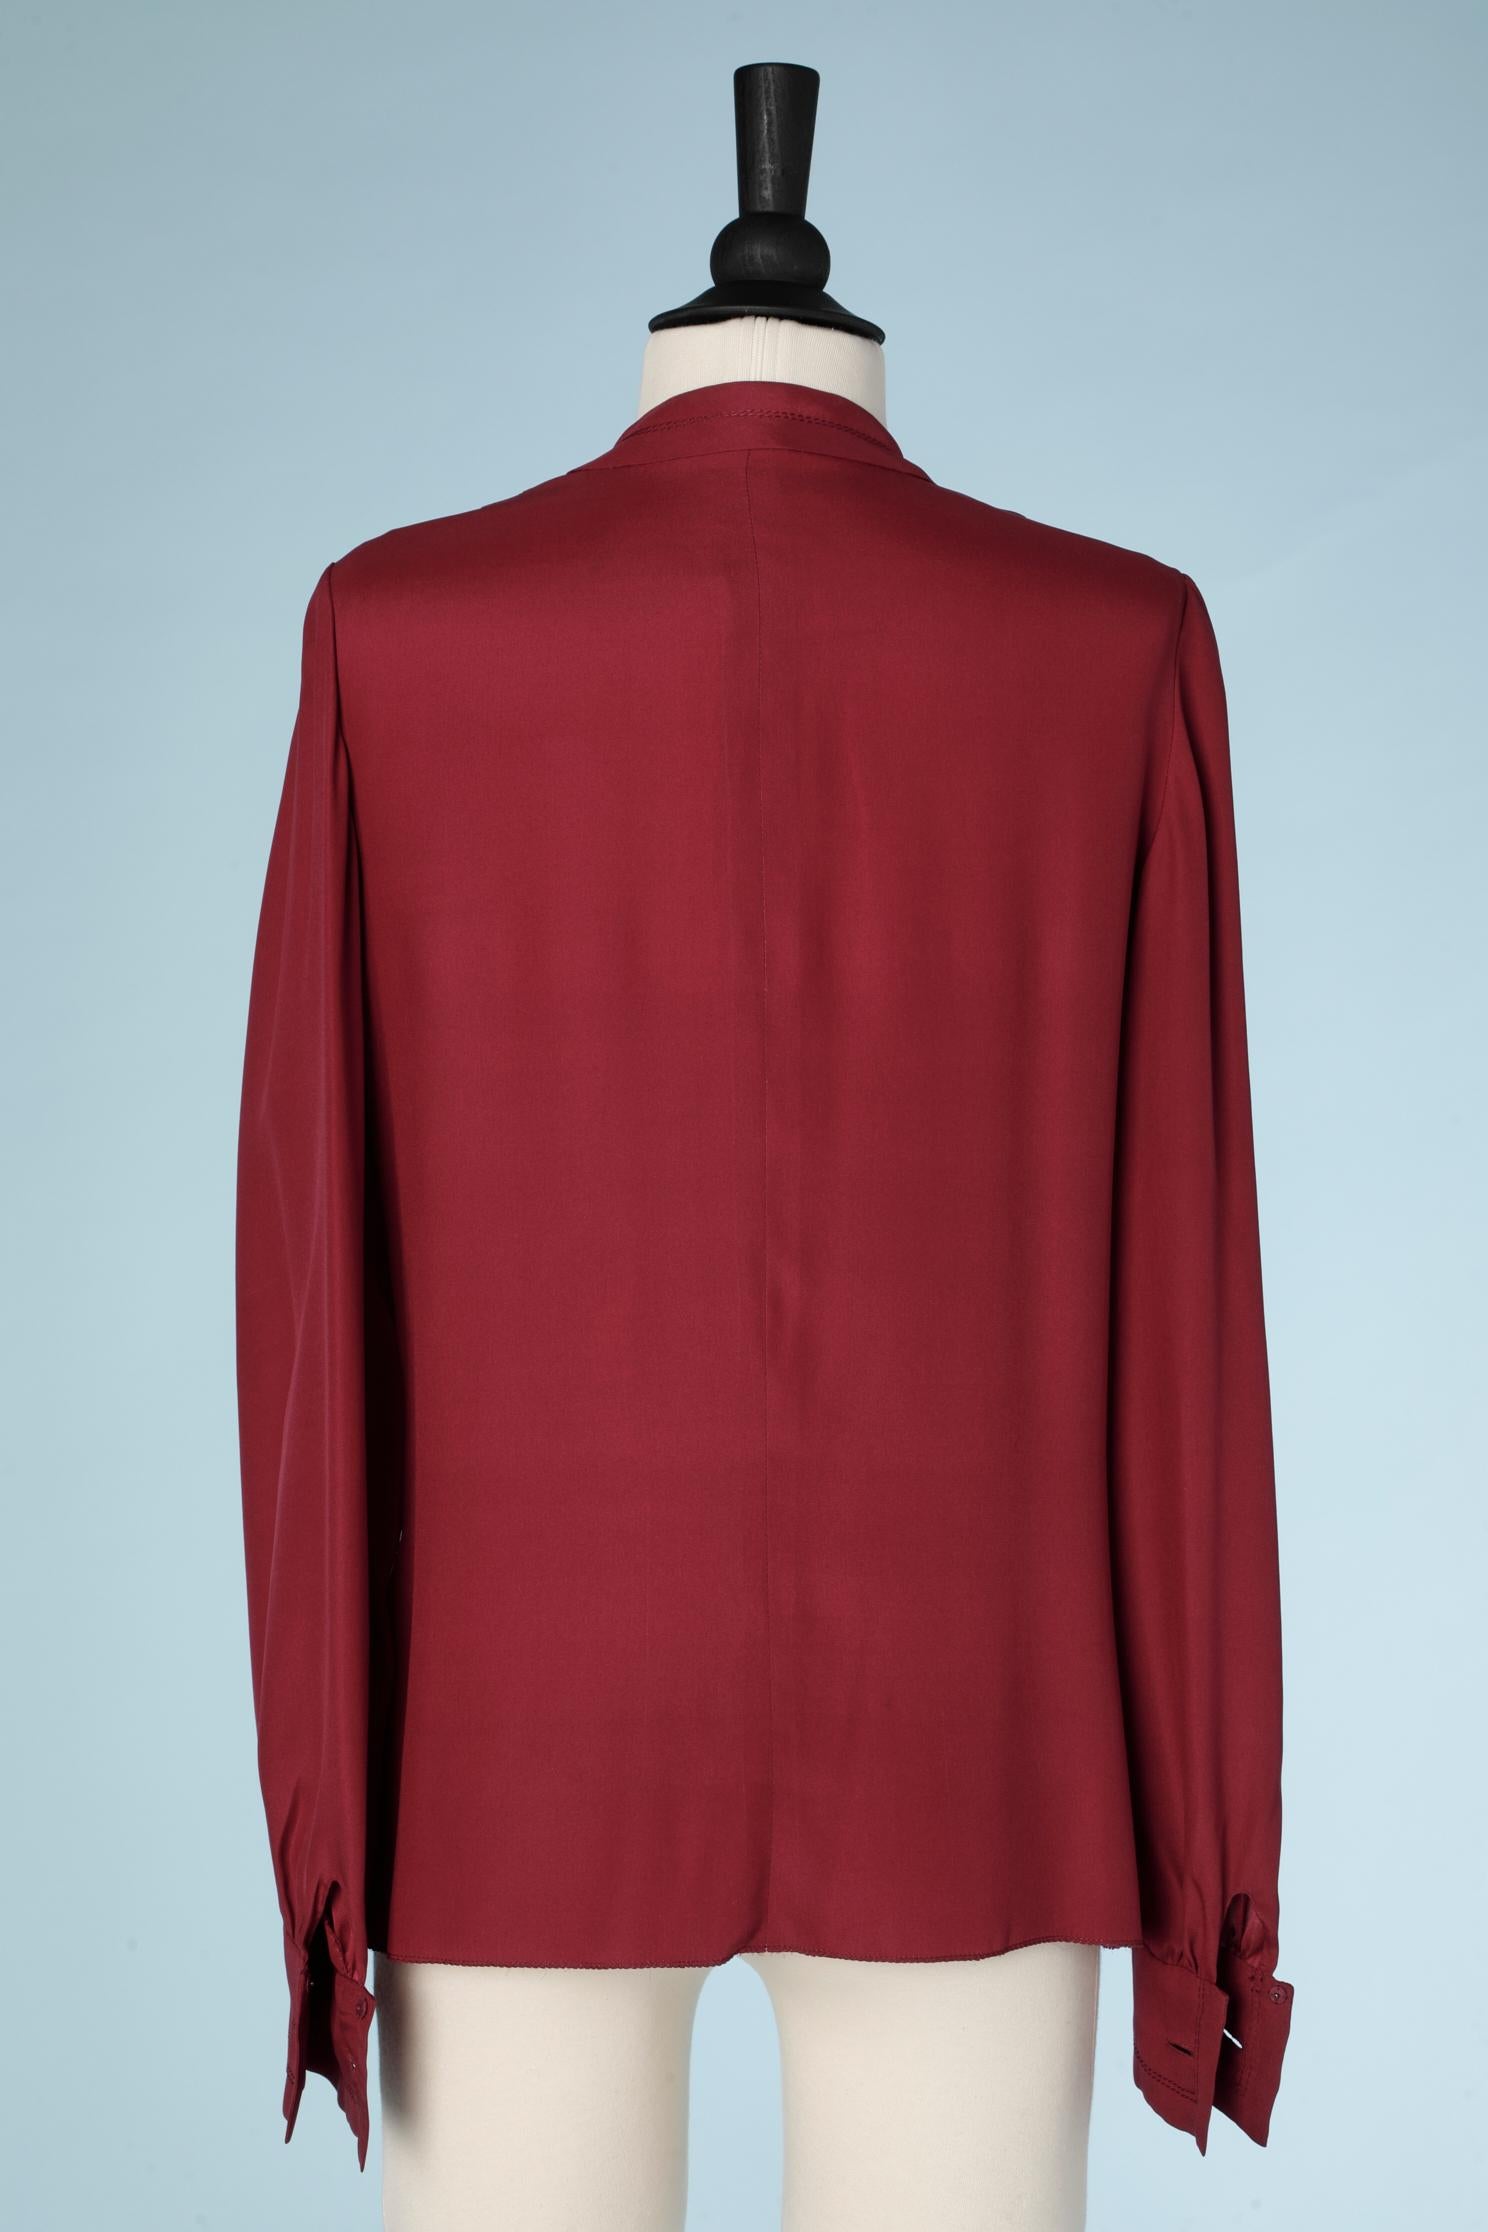 Women's or Men's Silk burgundy shirt Chanel Haute-Couture  For Sale